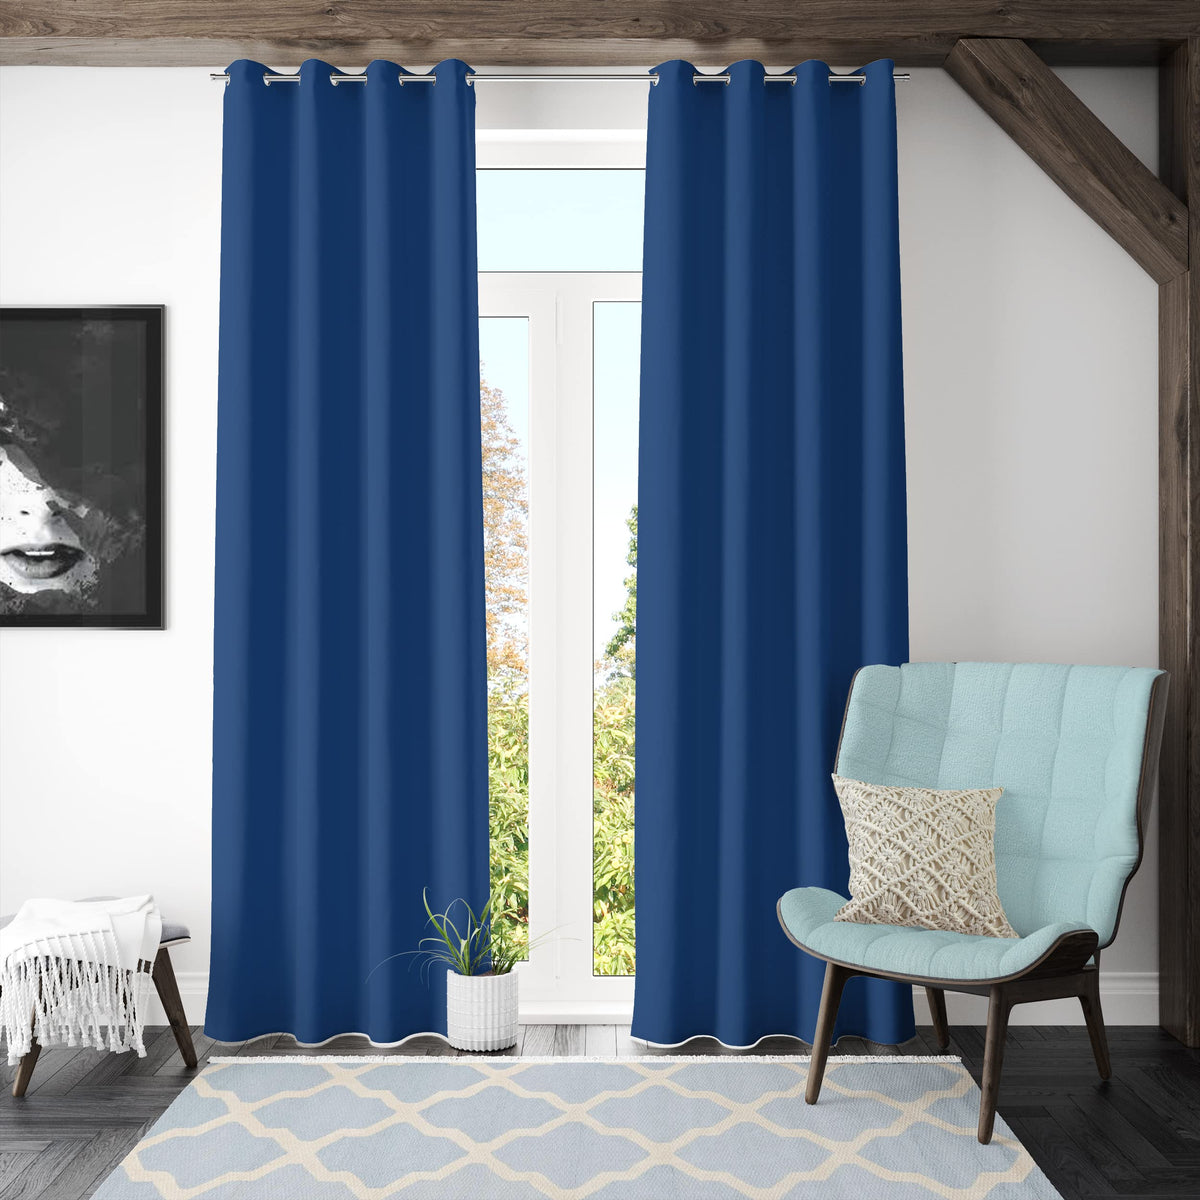 Homestic Polyester Decorative 5 Feet Window Curtain Darkening Blackout|Drapes Curtain with 8 Eyelet for Home & Office (Blue)